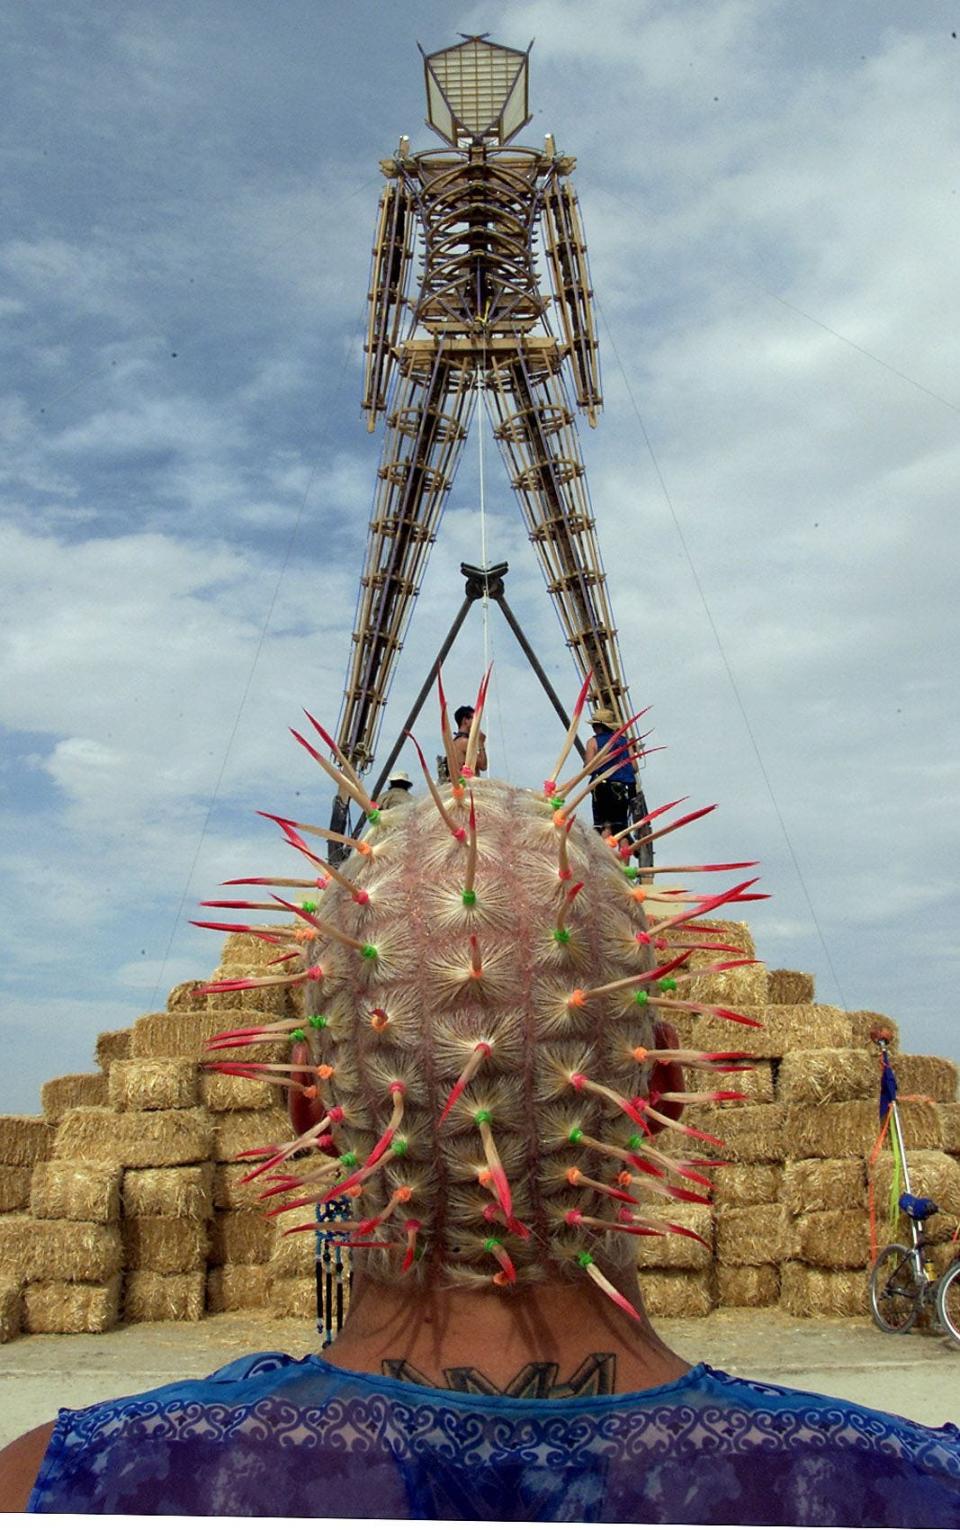 The Burning Man Festival (this was the 2000 edition, in Nevada) probably took a notion or two from "The Wicker Man."